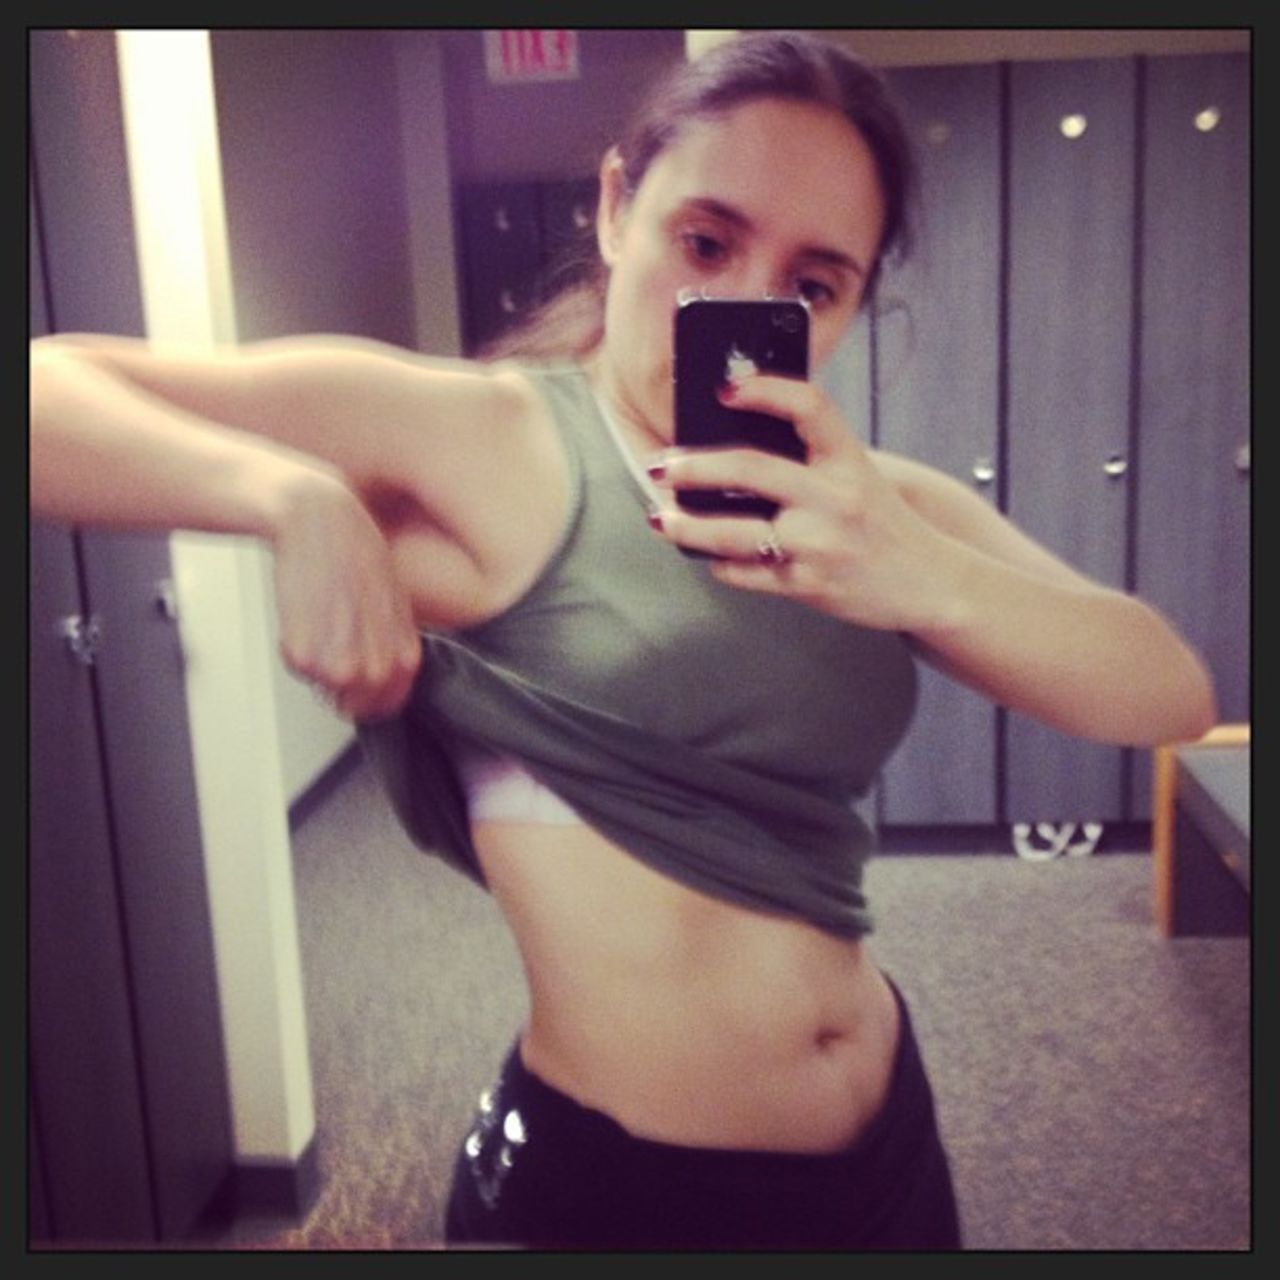 Osegueda works out three to four times a week. Here she is in 2013, at the gym, "showing off my 'ab sprouts'." 